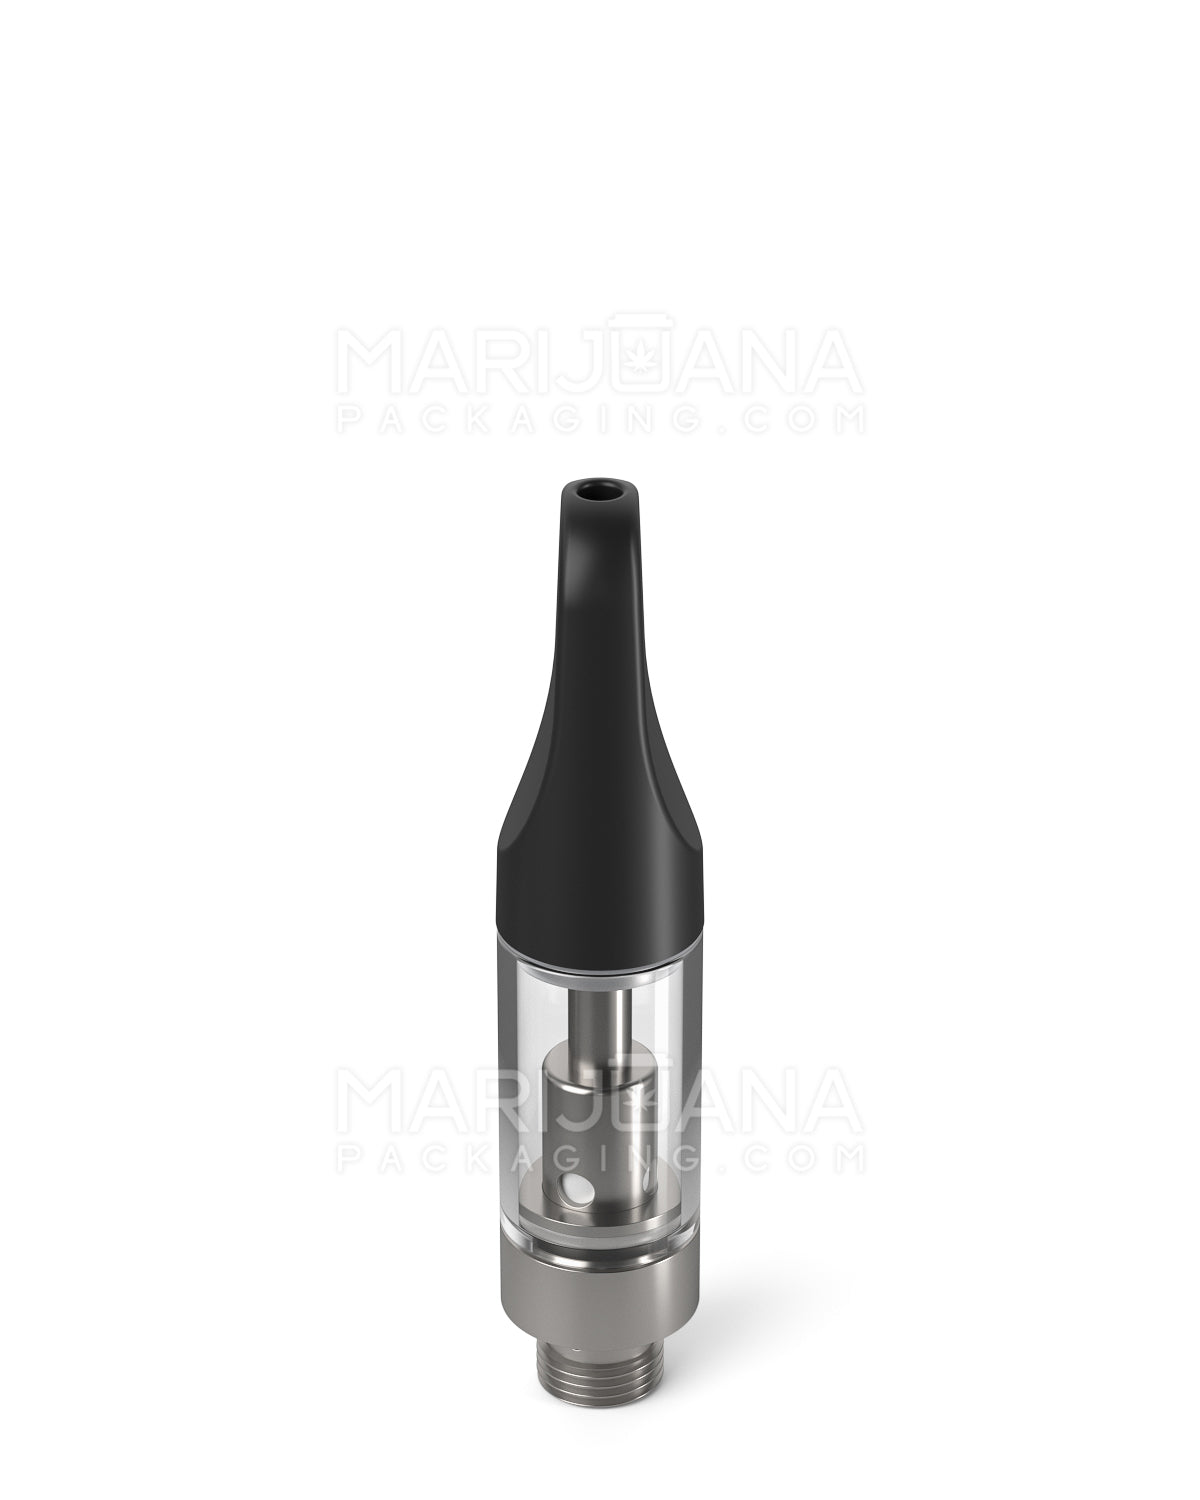 CCELL | Liquid6 Reactor Glass Vape Cartridge with Black Plastic Mouthpiece | 0.5mL - Screw On - 100 Count - 4